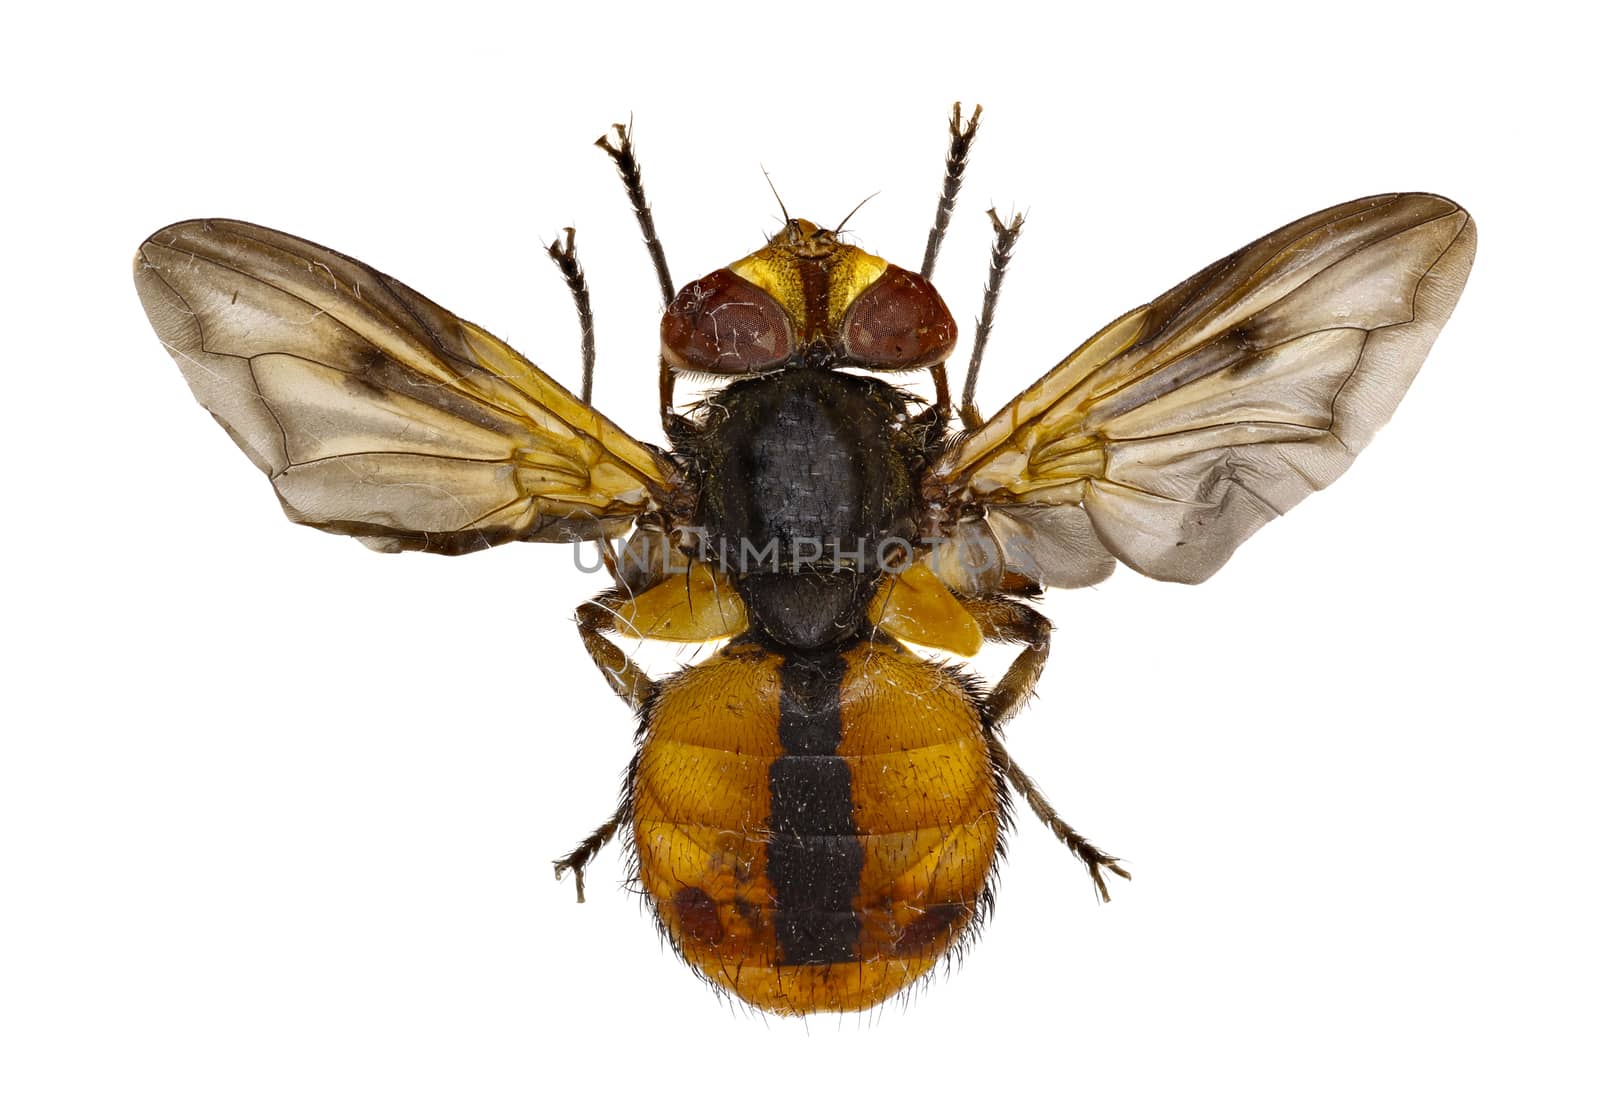 Tachinid Fly Ectophasia on white Background  -  Ectophasia crassipennis (Fabricius, 1794)